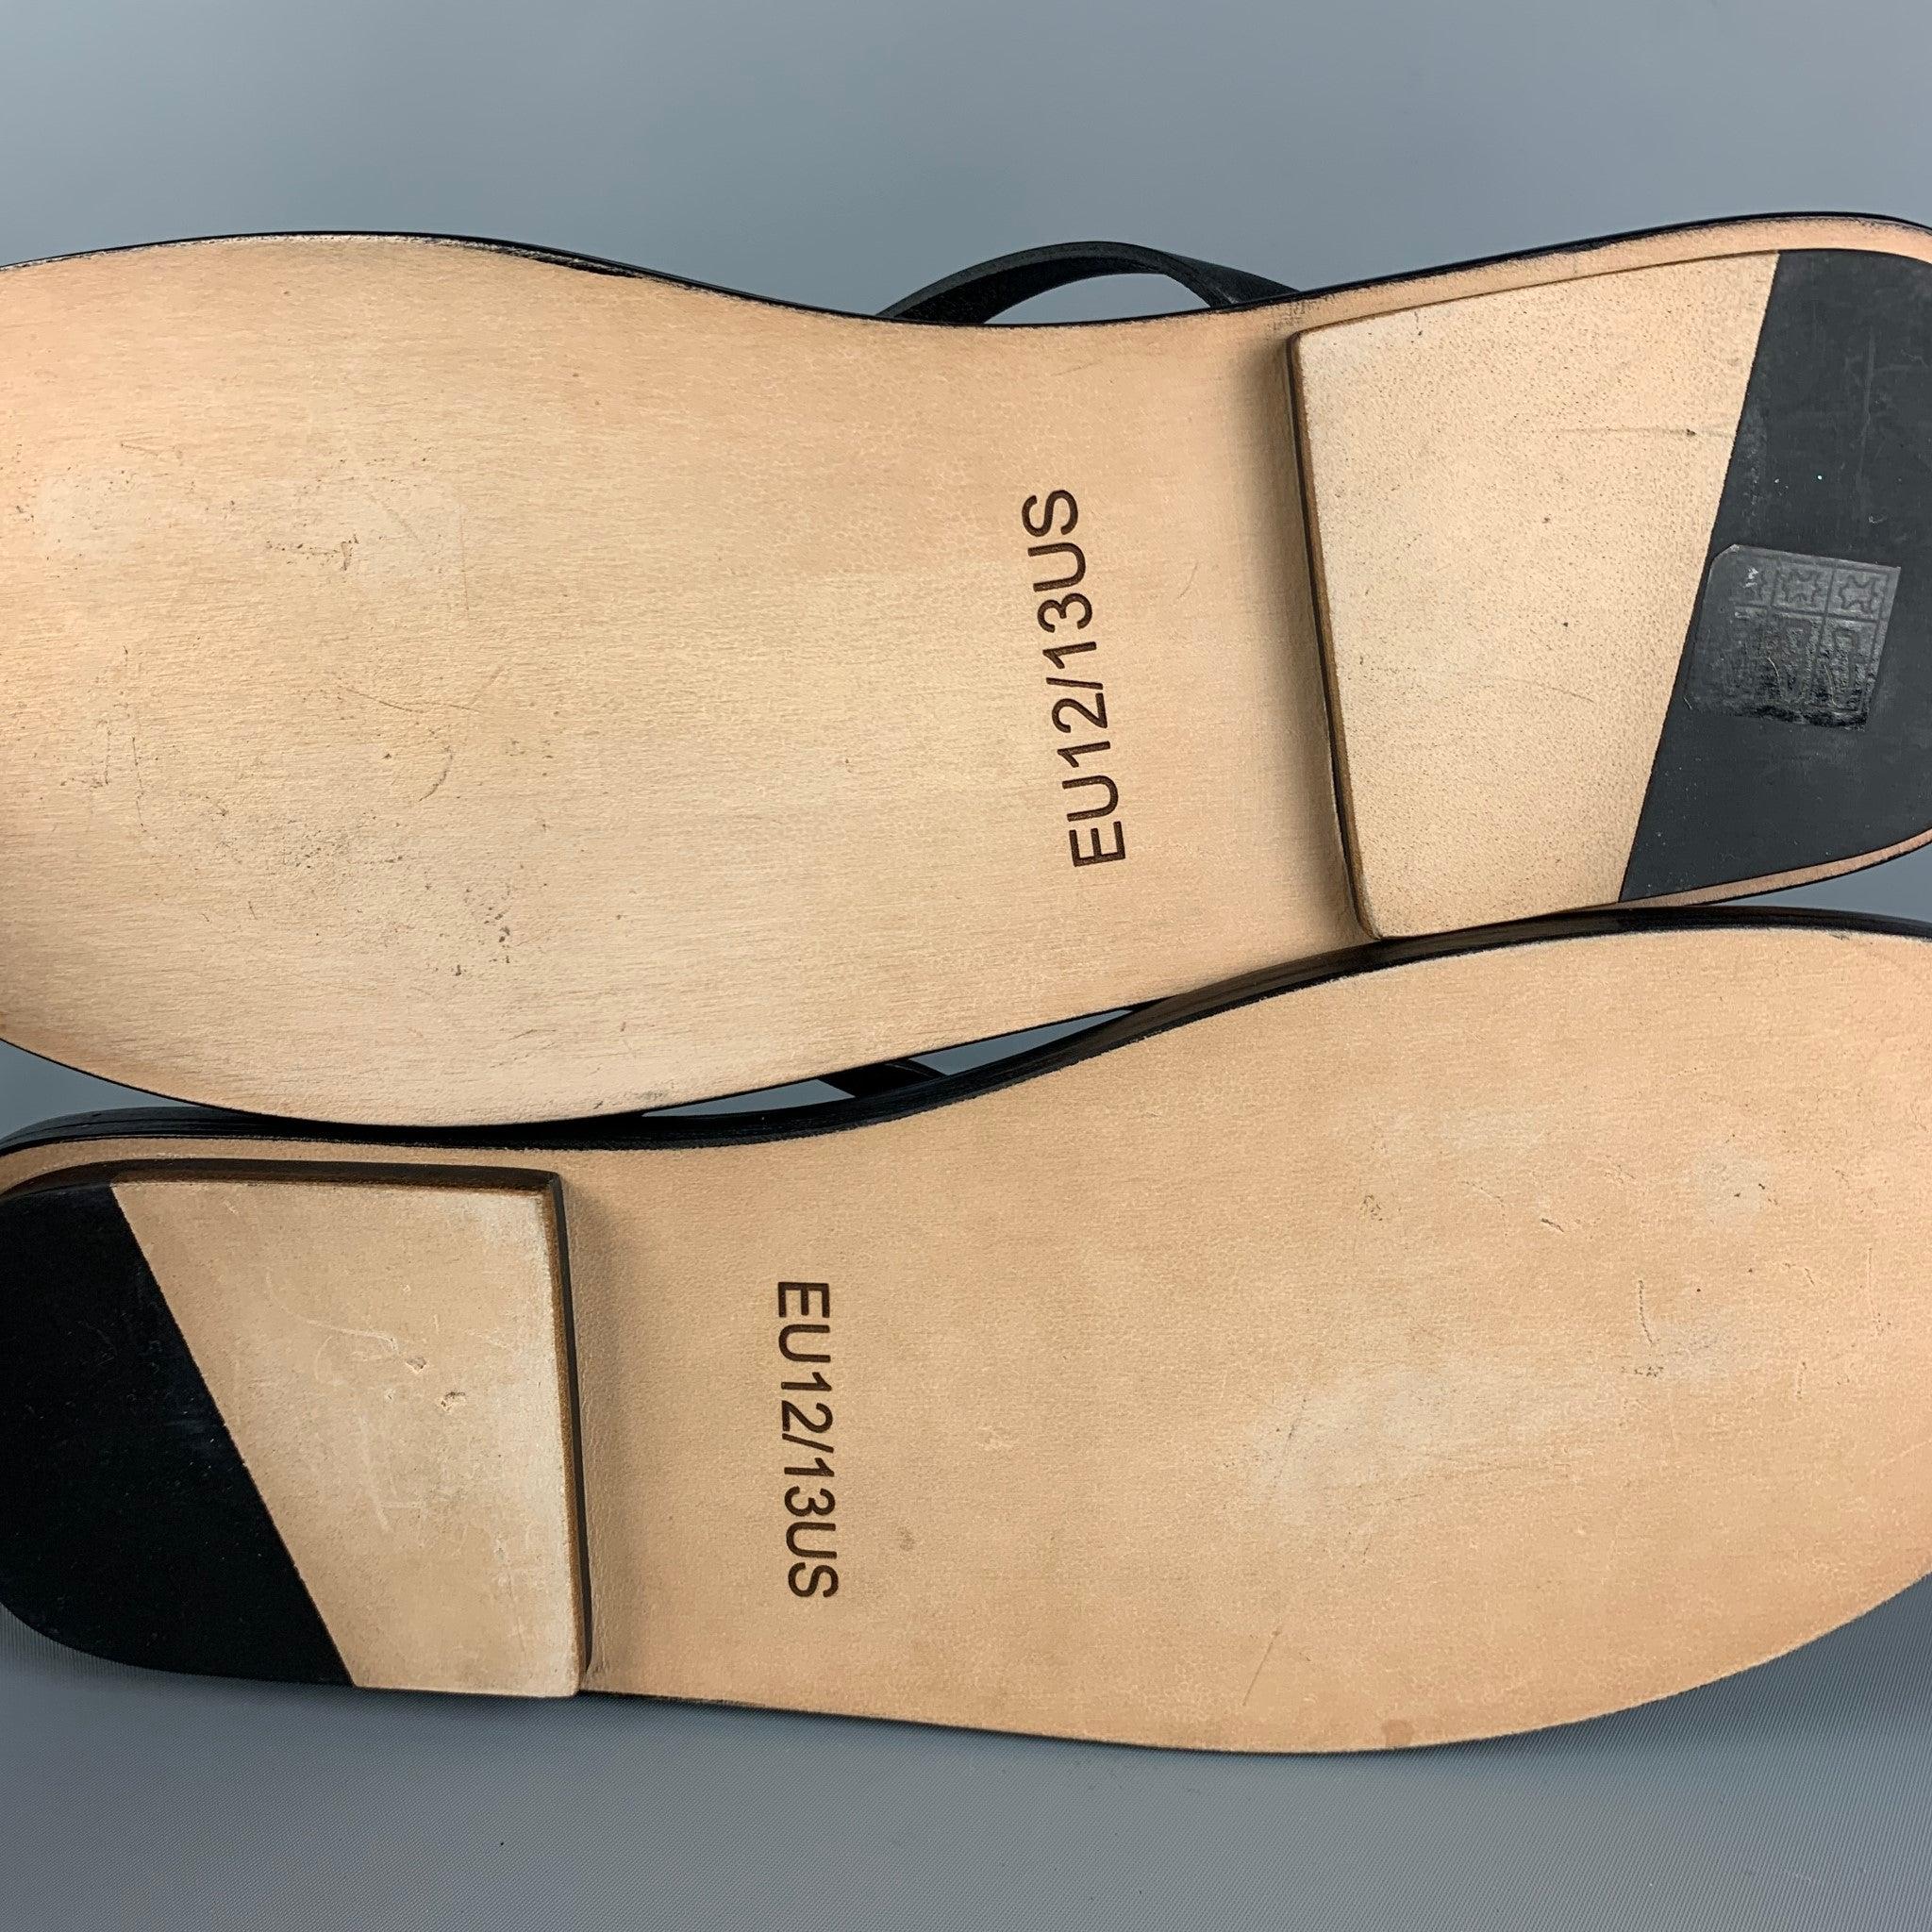 BRIONI Size 13 Black Leather Thong Sandals For Sale 2